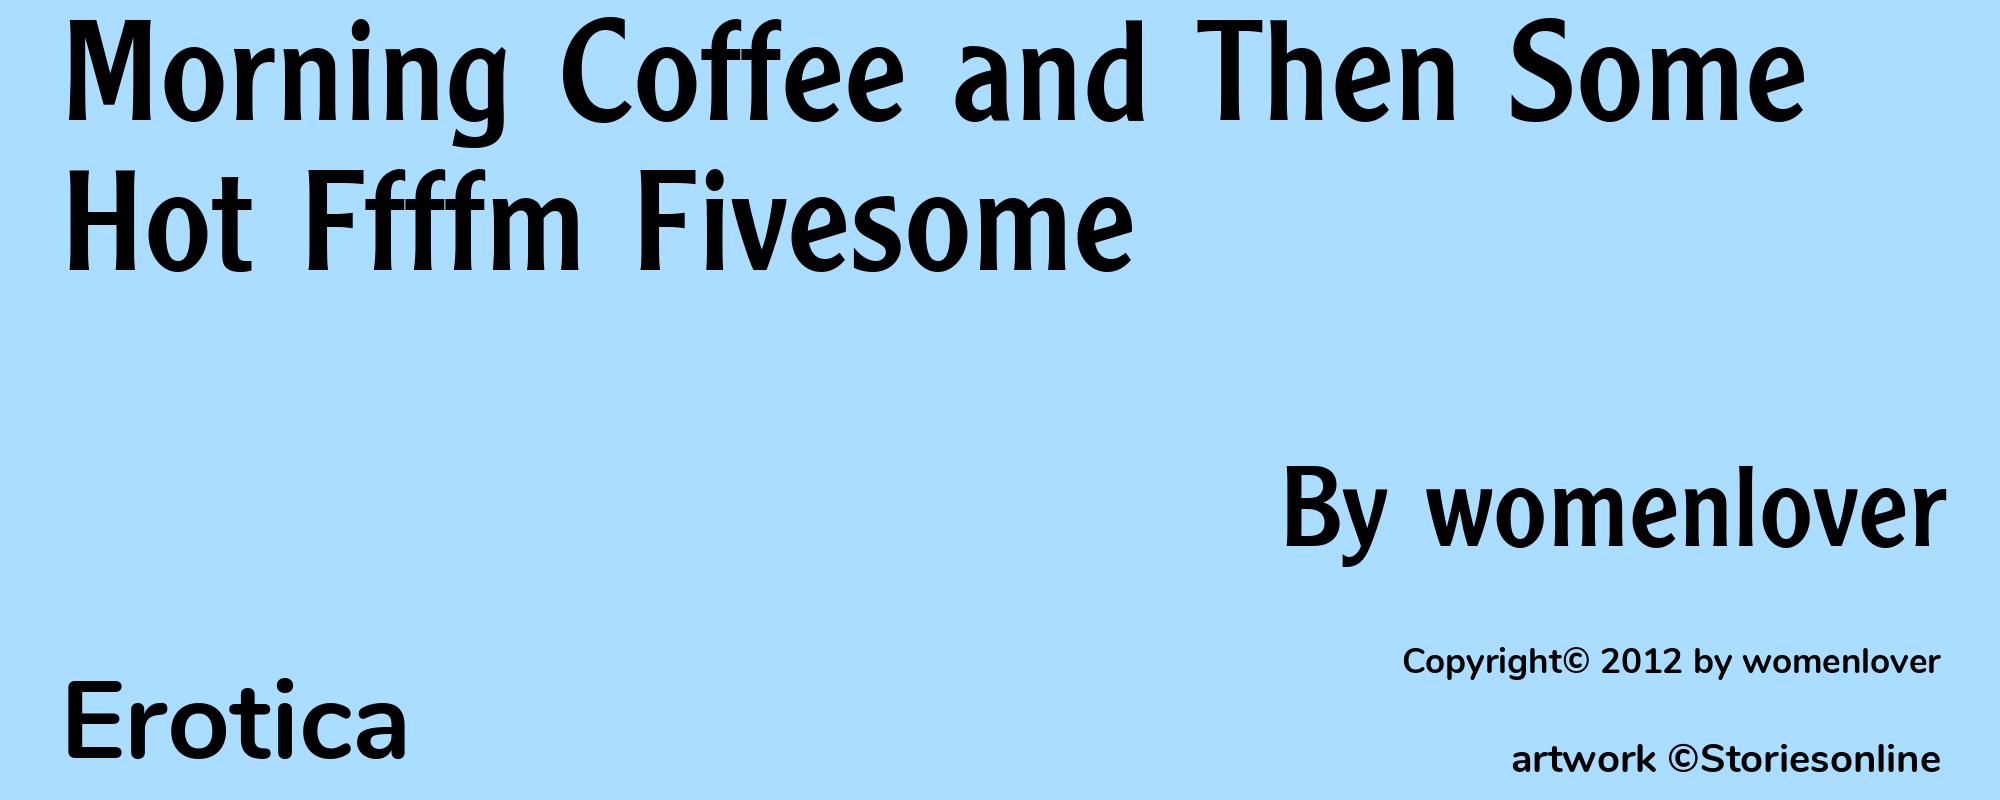 Morning Coffee and Then Some Hot Ffffm Fivesome - Cover